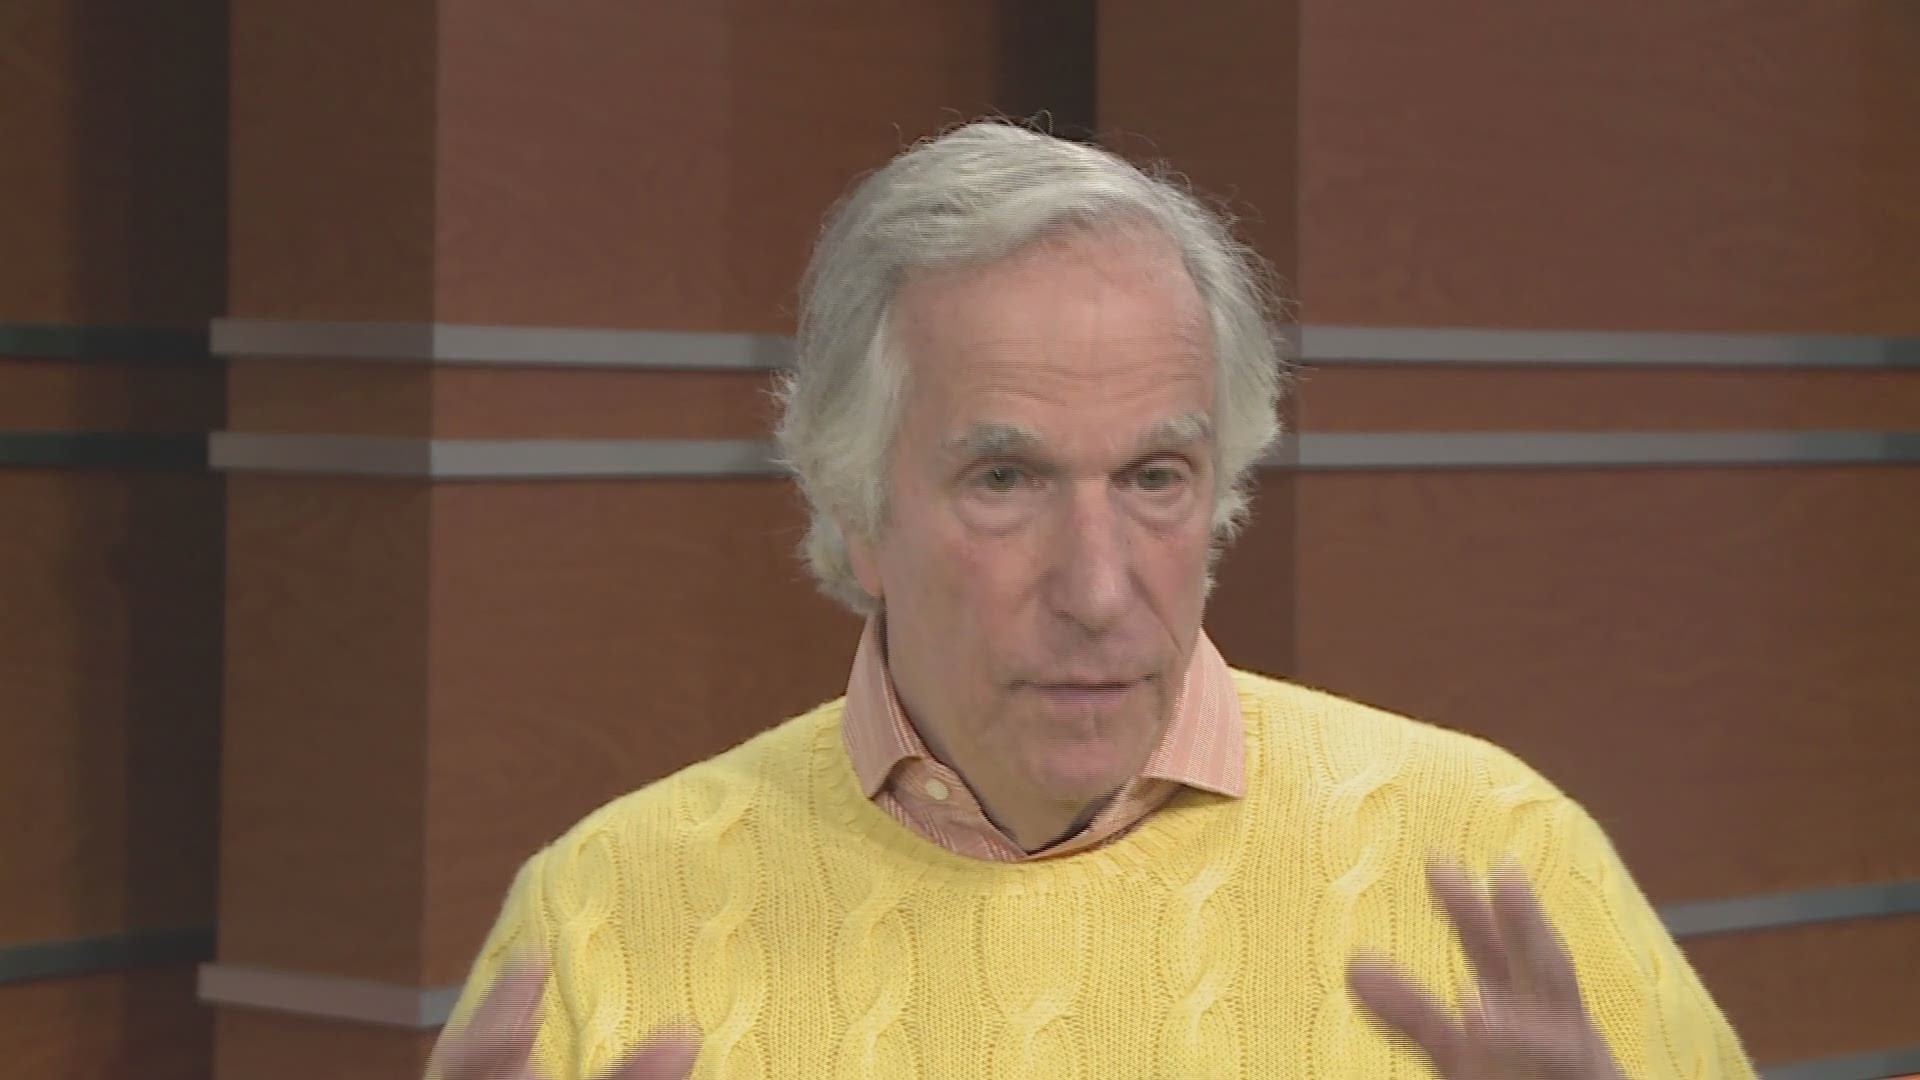 Henry Winkler discusses winning his first Emmy